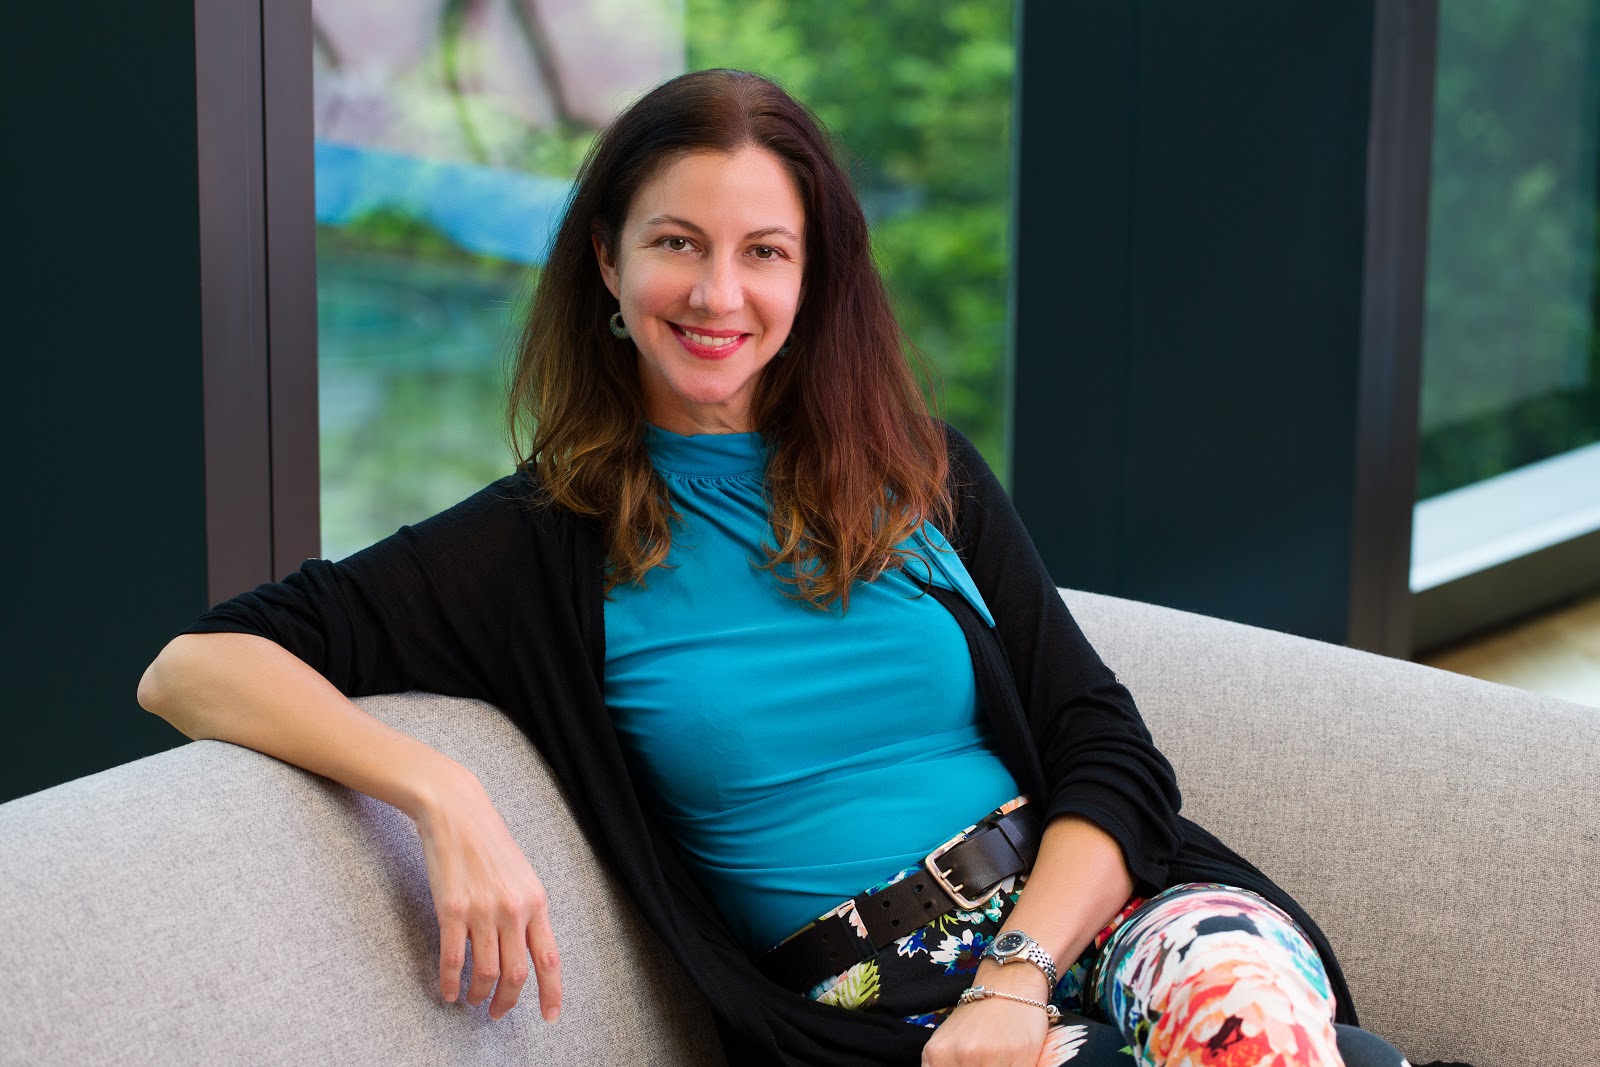 Google empowers women and girls through new Impact Challenge | Q&A with Stephanie Davis, VP of Google Southeast Asia